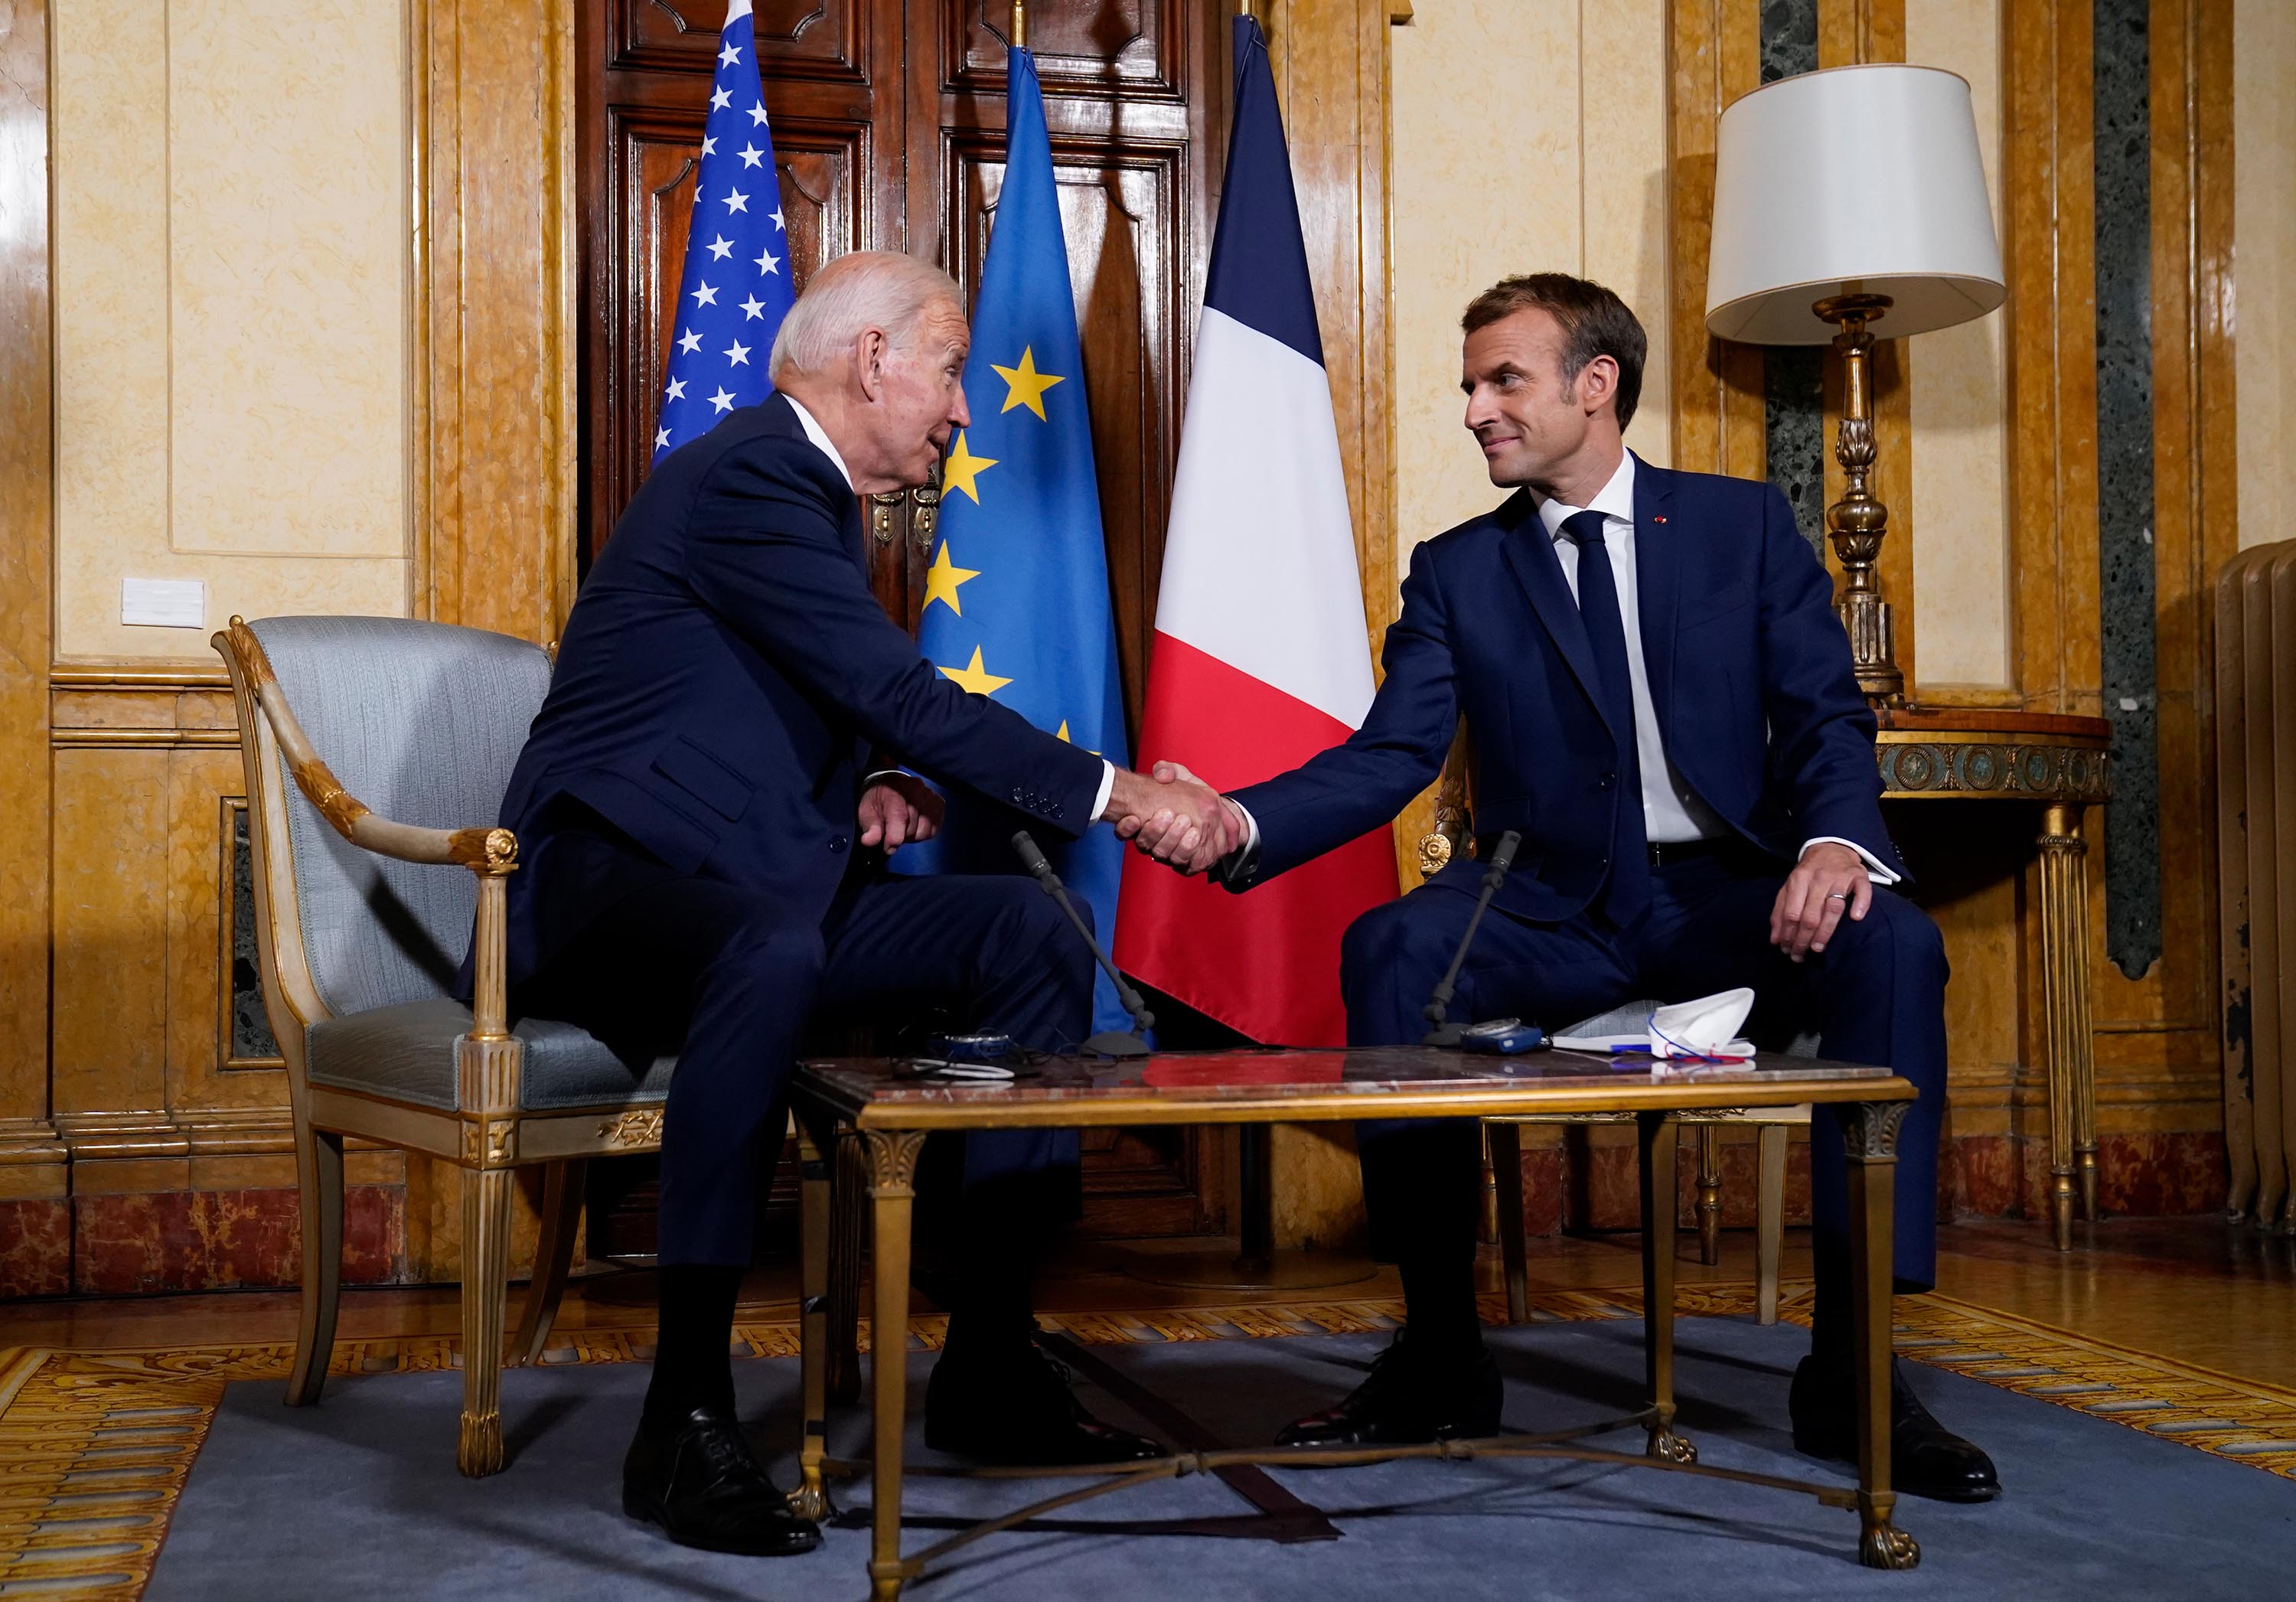 Biden, left, and French President Emmanuel Macron shake hands during a meeting at La Villa Bonaparte in Rome, Friday.